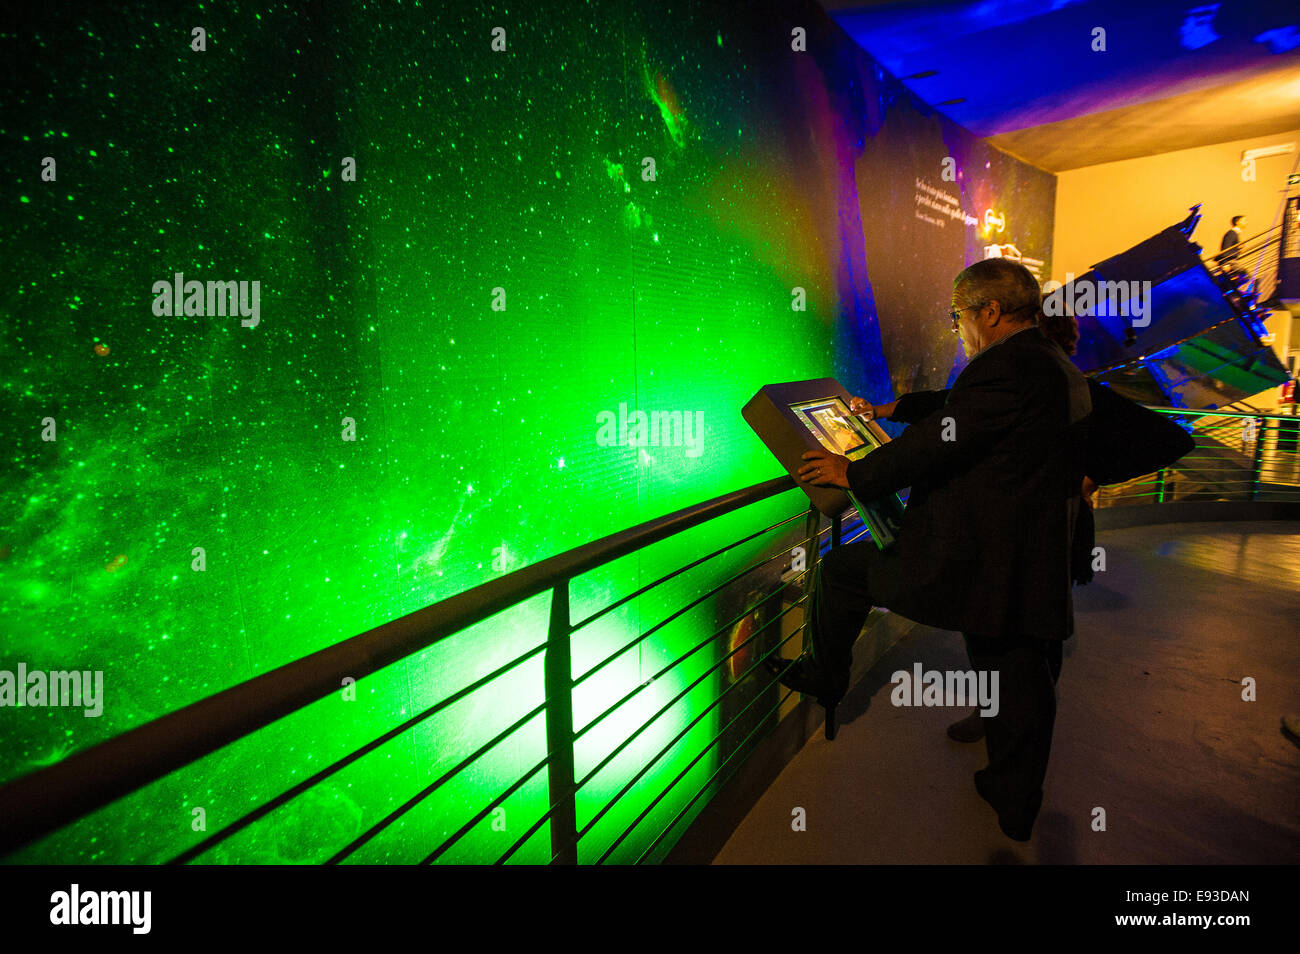 Italy Piedmont Turin Pino Torinese Inauguration of the new museum area of the Turin Museum Planetarium Astronomy and Space INFINI.TO 17th October 2014 Stock Photo